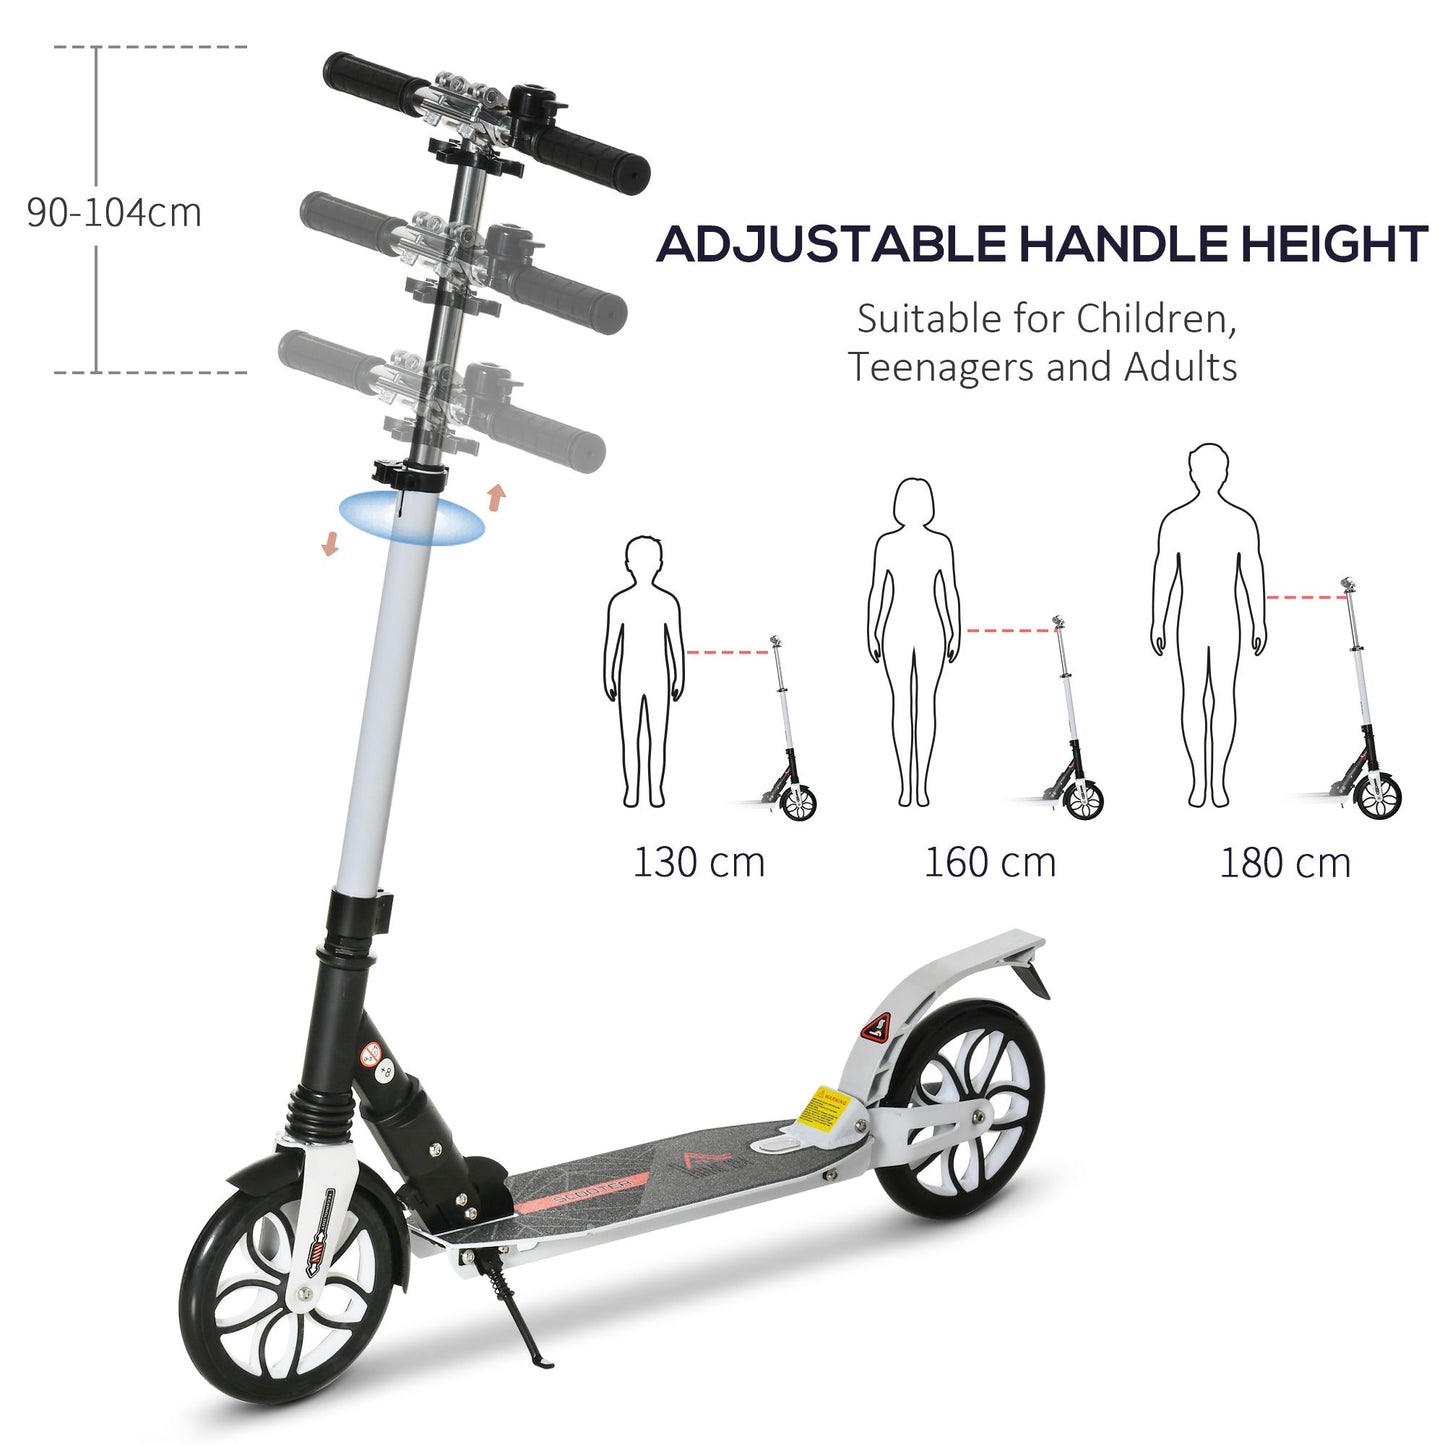 HOMCOM Folding Kick Scooter, Hight-Adjustable Urban Scooter w/ Rear Brake, Double Shock Absorption System, Warning Bell For 14+ Teens Adult, White